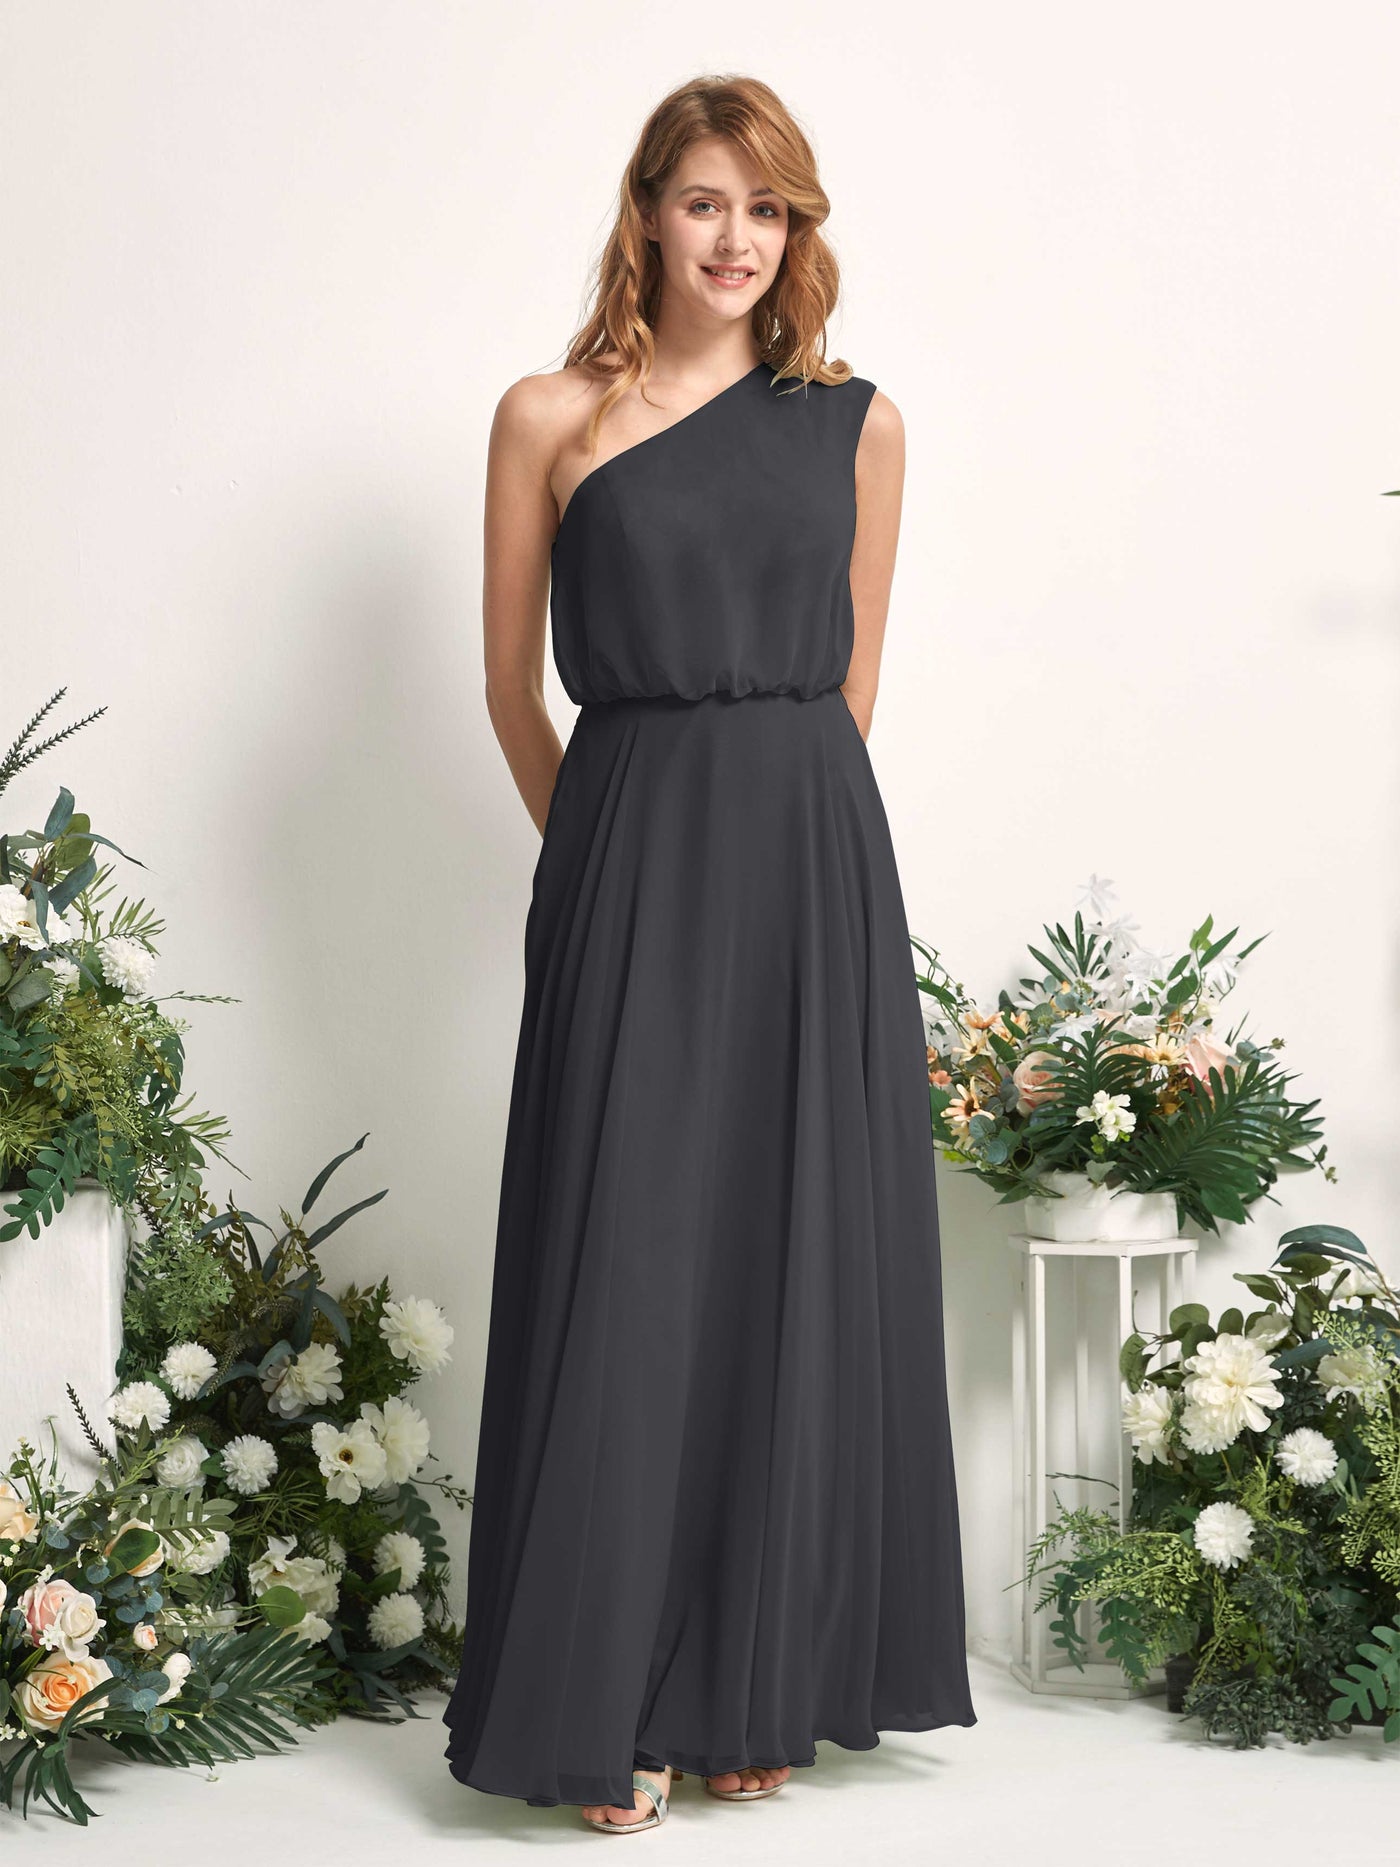 Bridesmaid Dress A-line Chiffon One Shoulder Full Length Sleeveless Wedding Party Dress - Pewter (81226838)#color_pewter